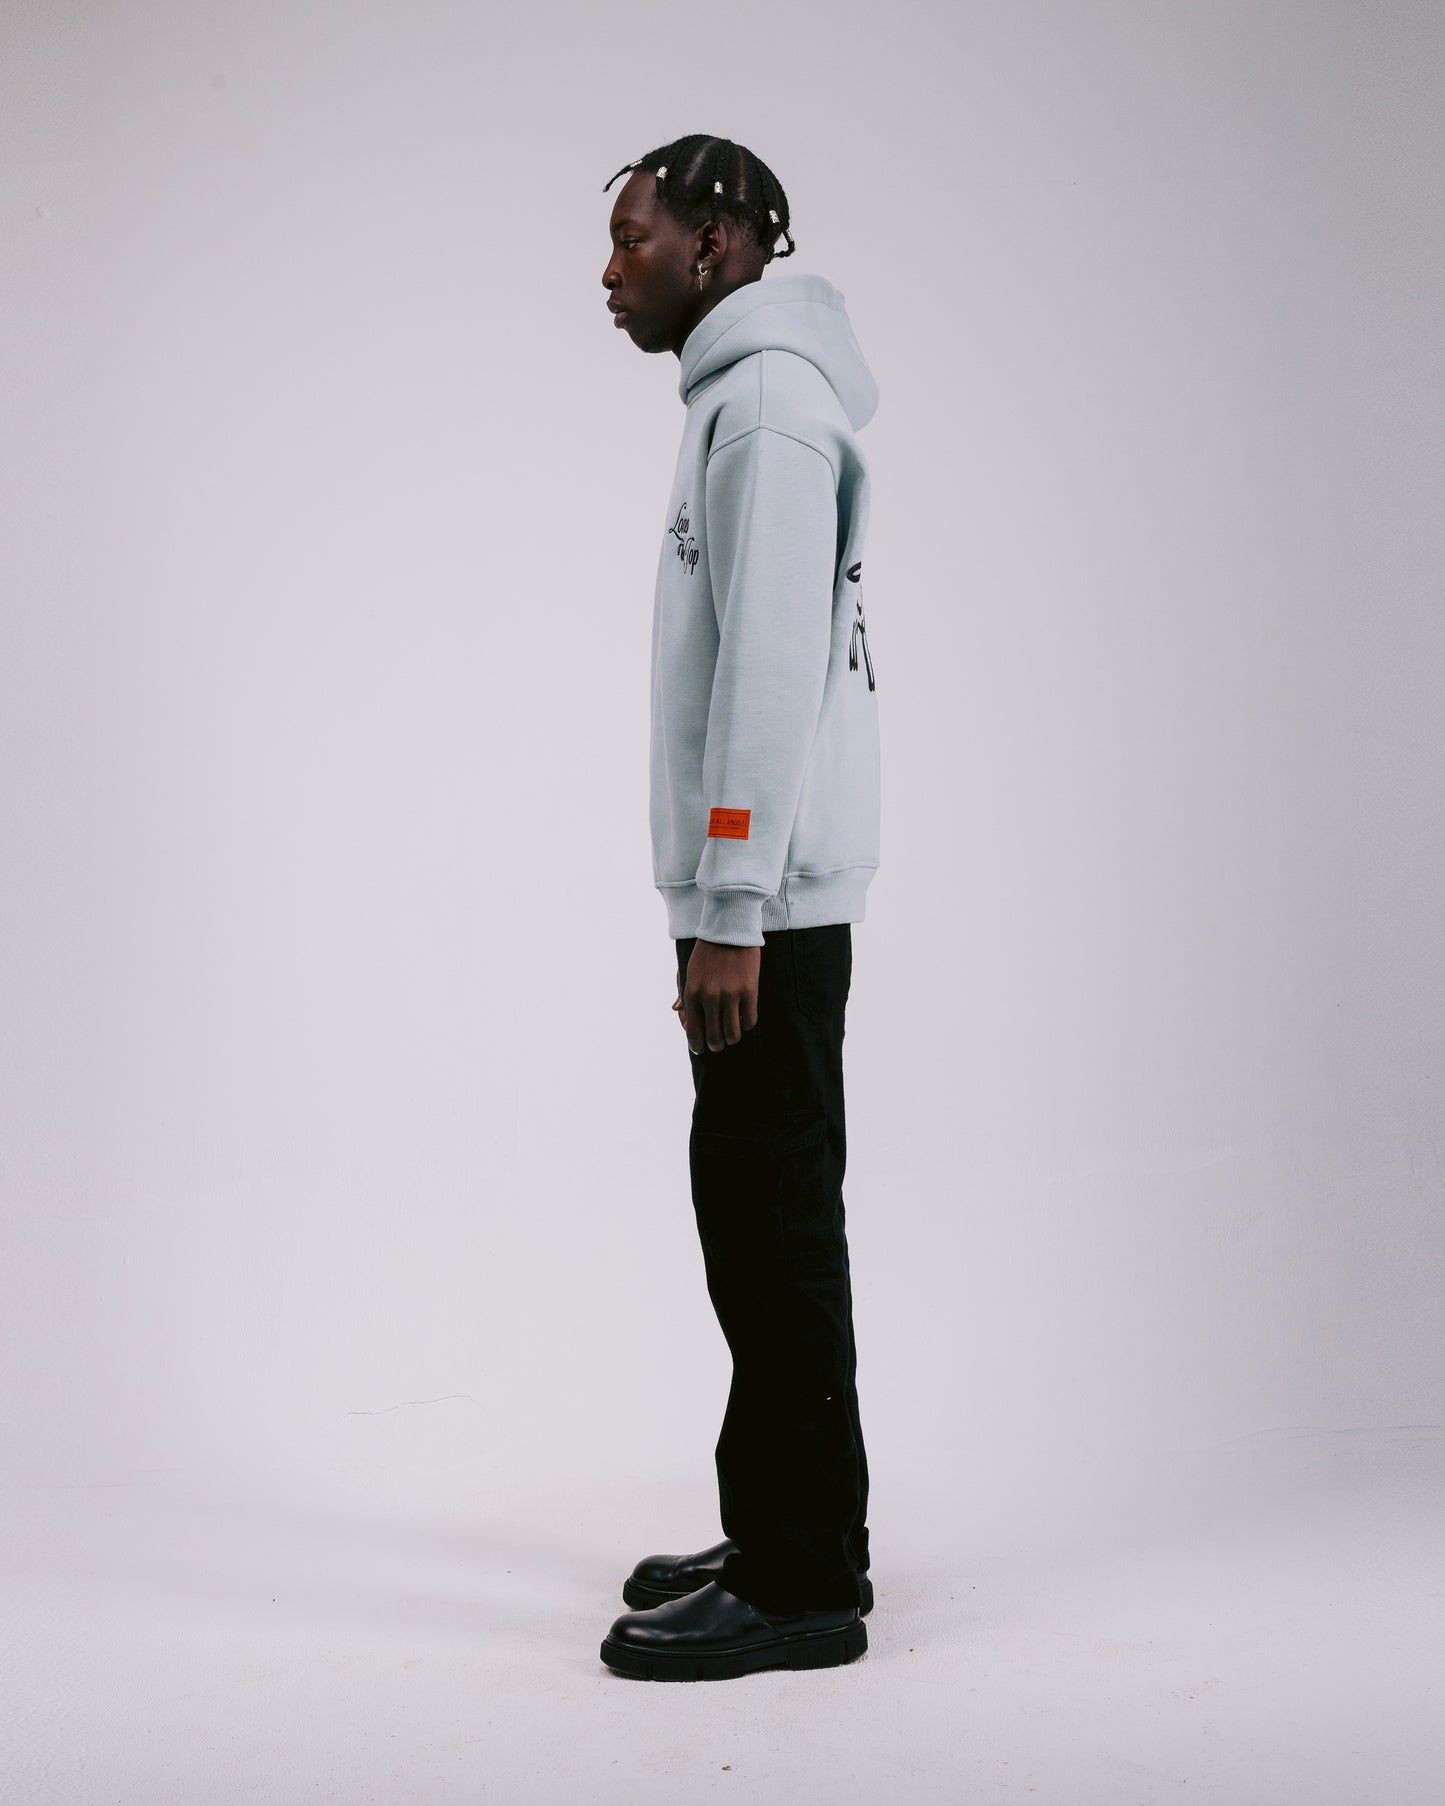 "LONELY AT THE TOP" HOODIE